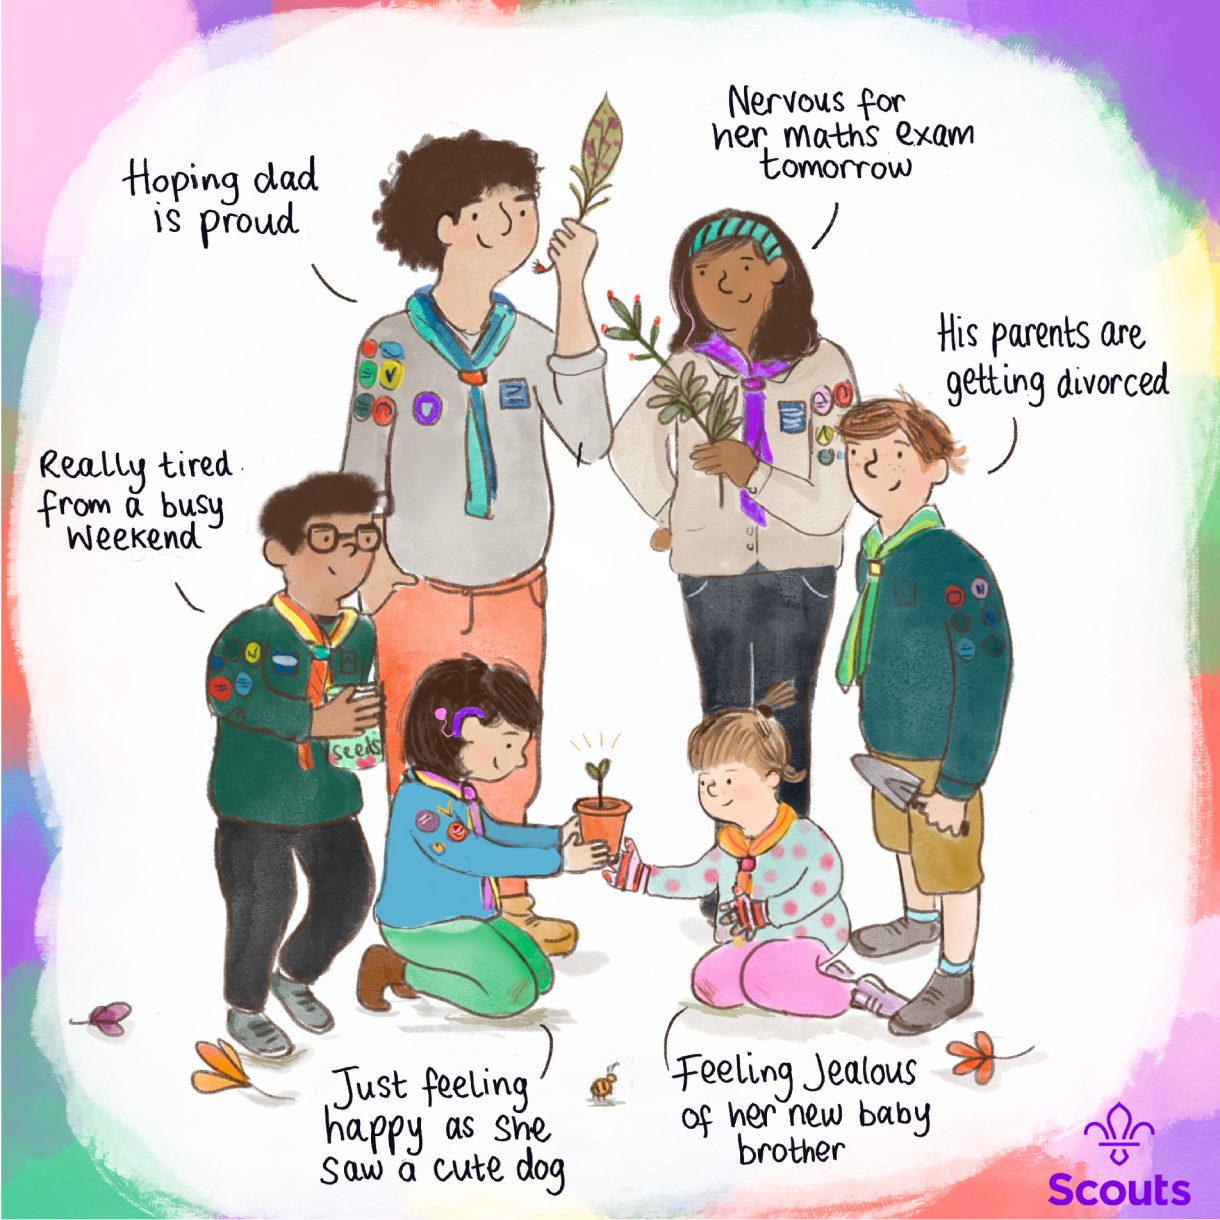 Scouts – Mental Health Awareness campaign